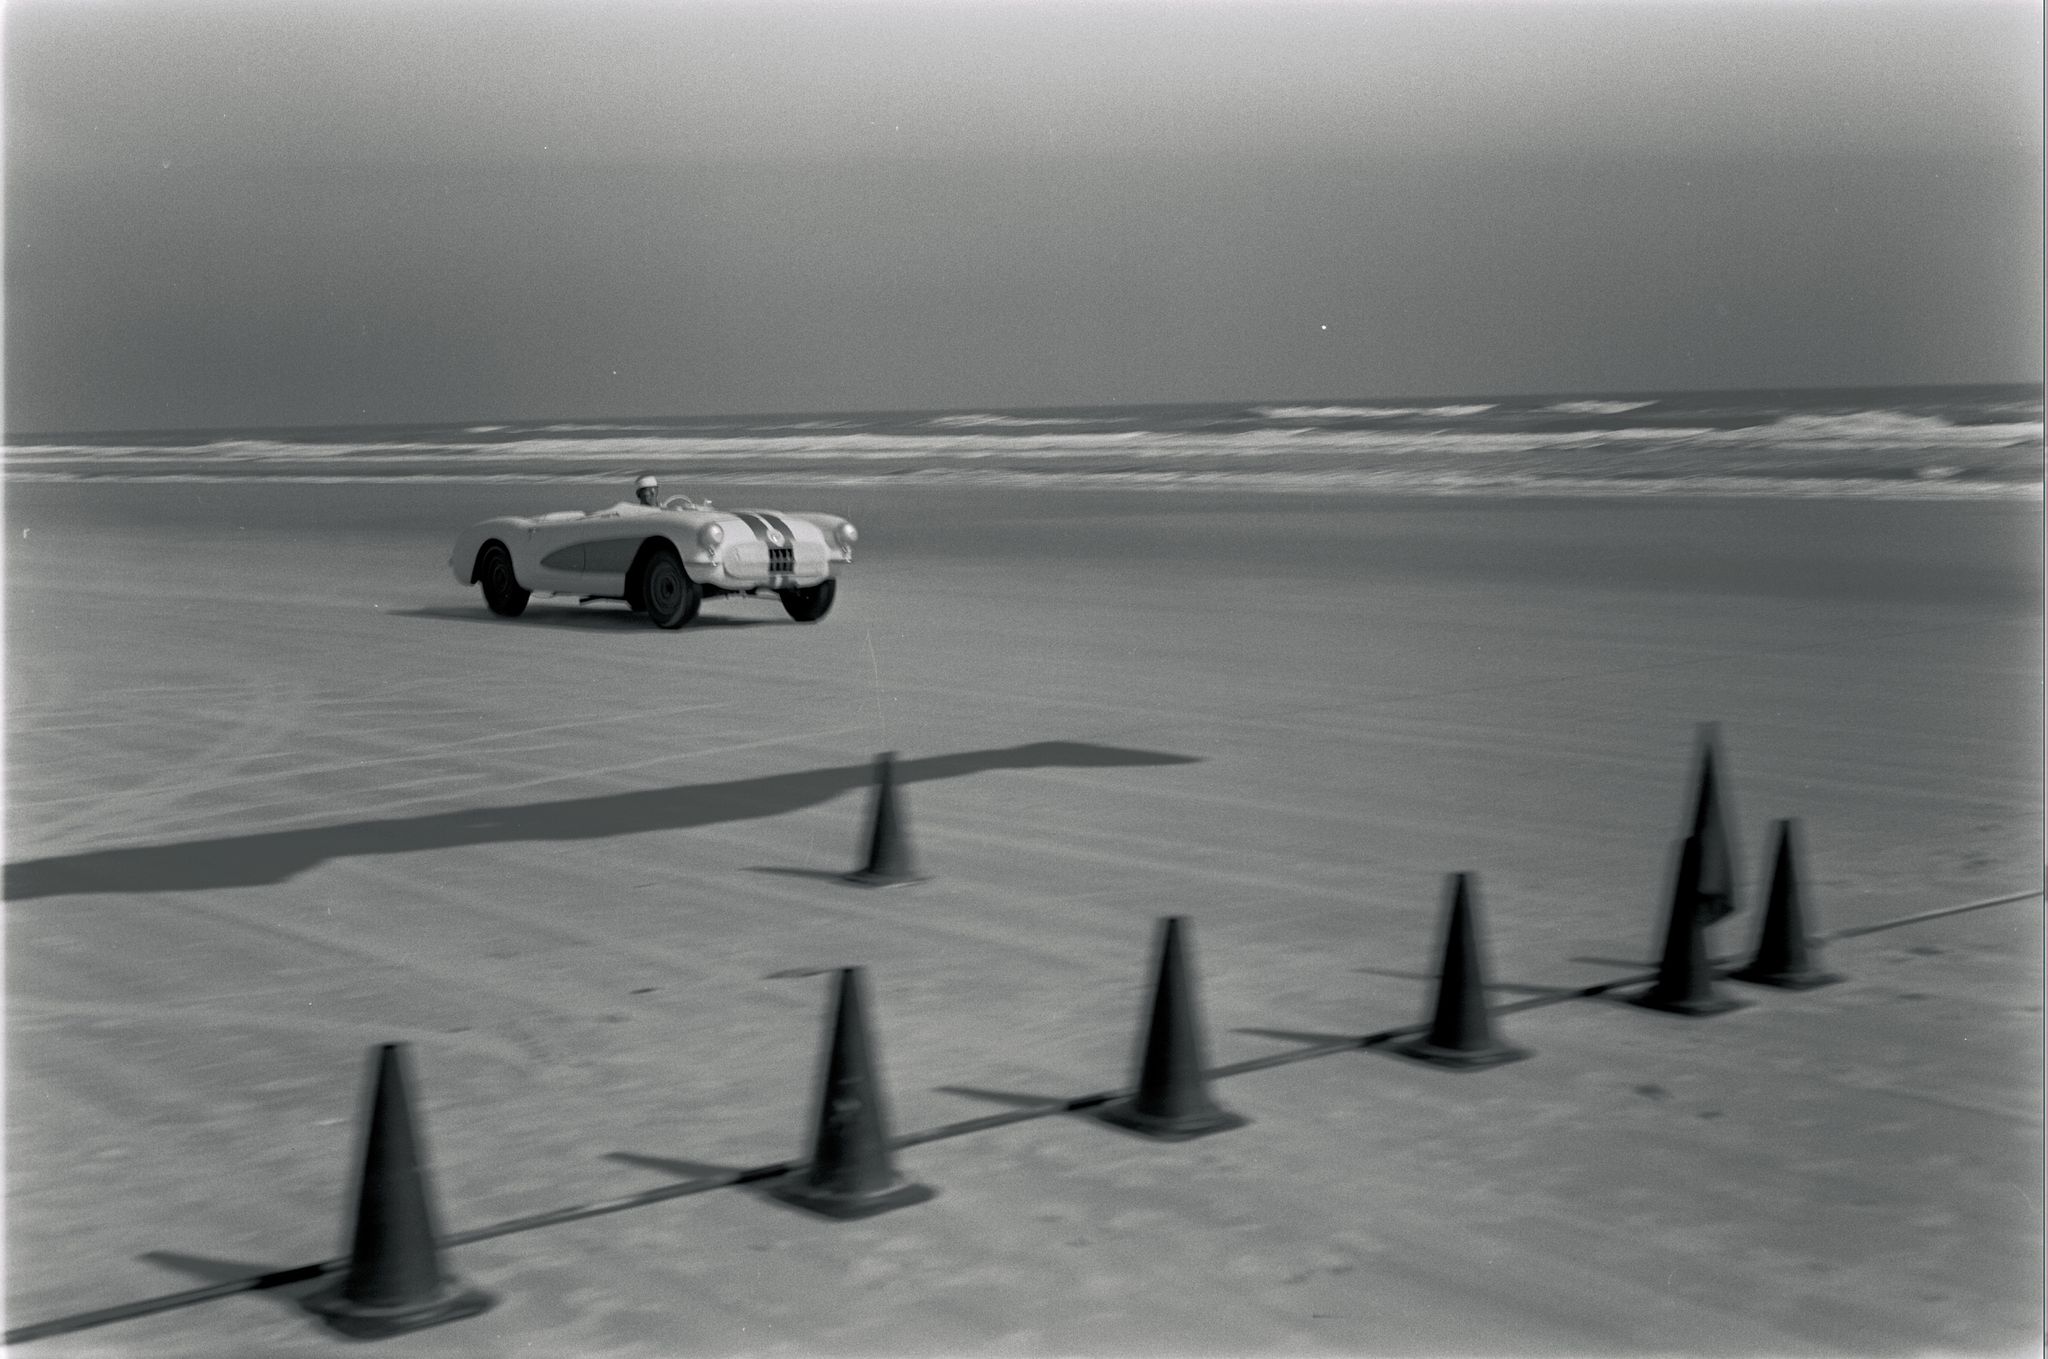 united states february 28 daytona beach speed week 1956 one of three nearly identical looking chevrolet corvettes that raced the sand this one featured the additional streamlining of zora arkus duntov's car the other two were driven by john fitch and betty skelton duntov reached over 147 mph, the fastest of the trio photo by wally parksthe enthusiast network via getty imagesgetty images